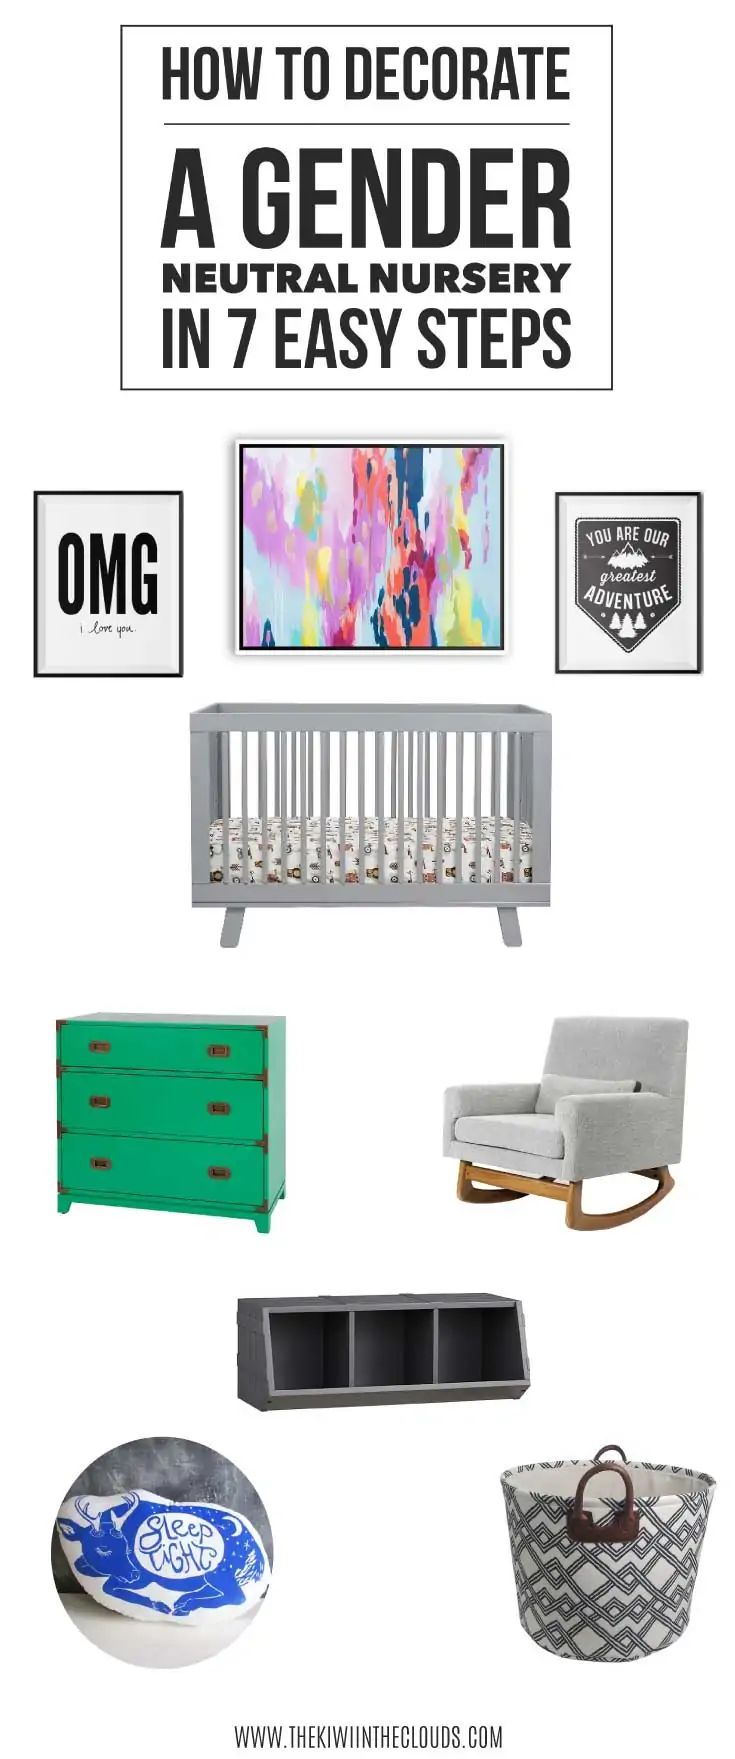 how to decorate gender neutral nursery